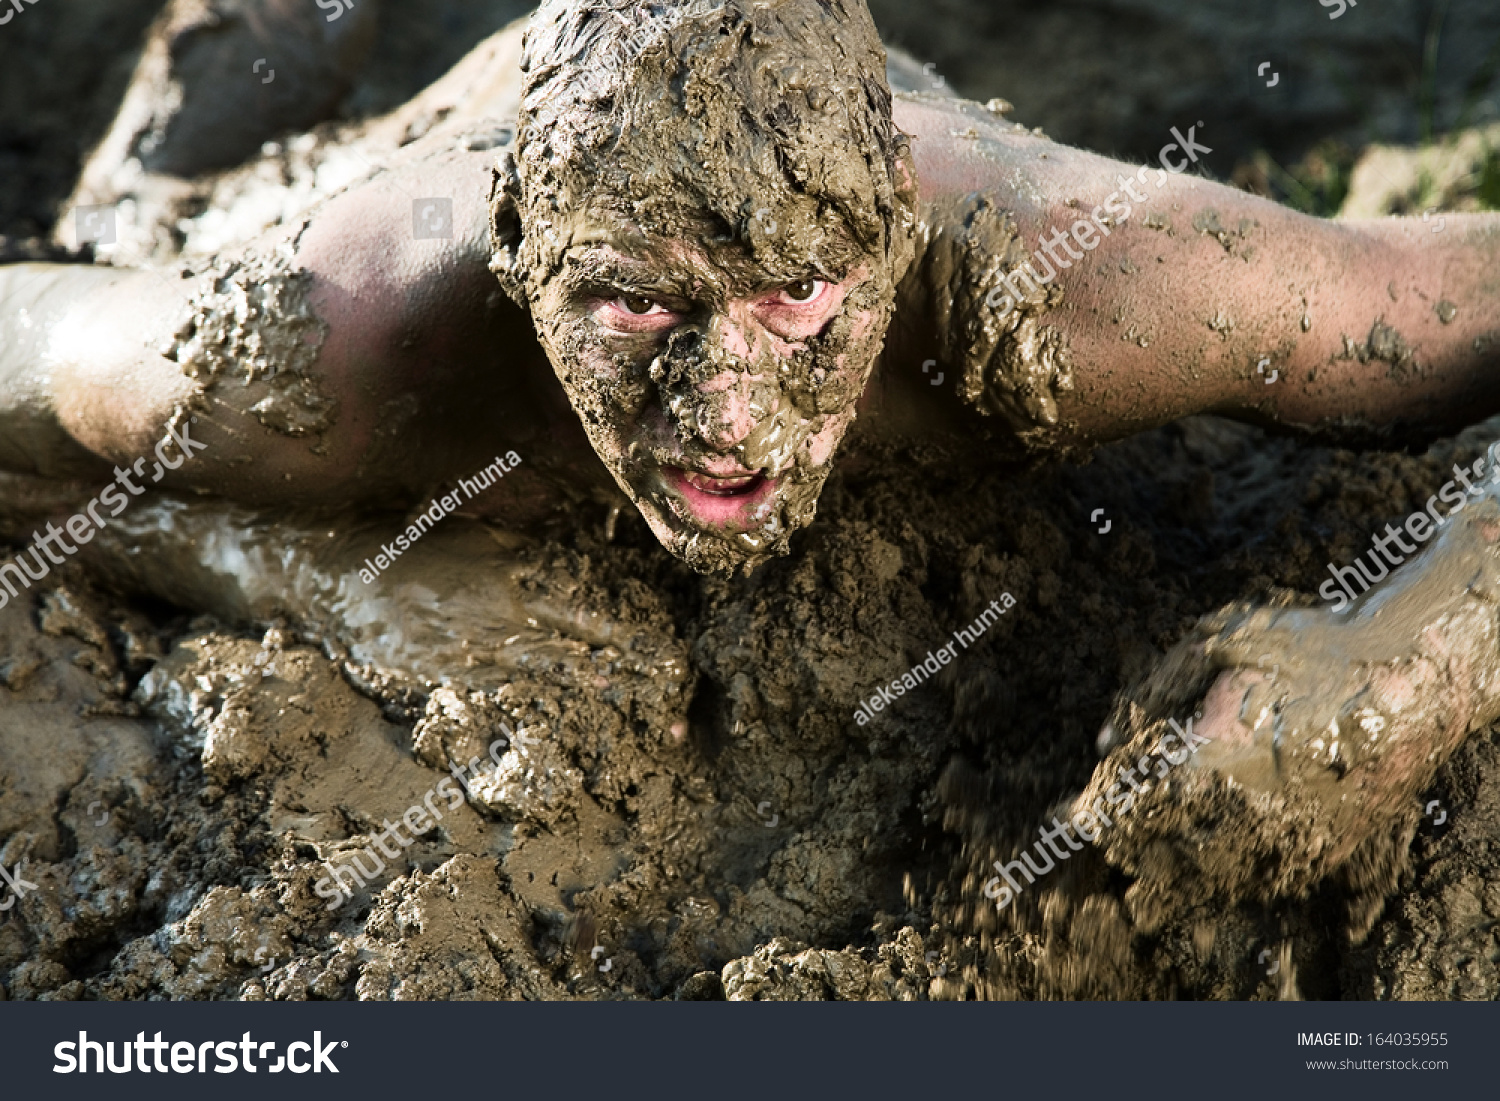 Video Of Naked Woman Covered In Mud 51